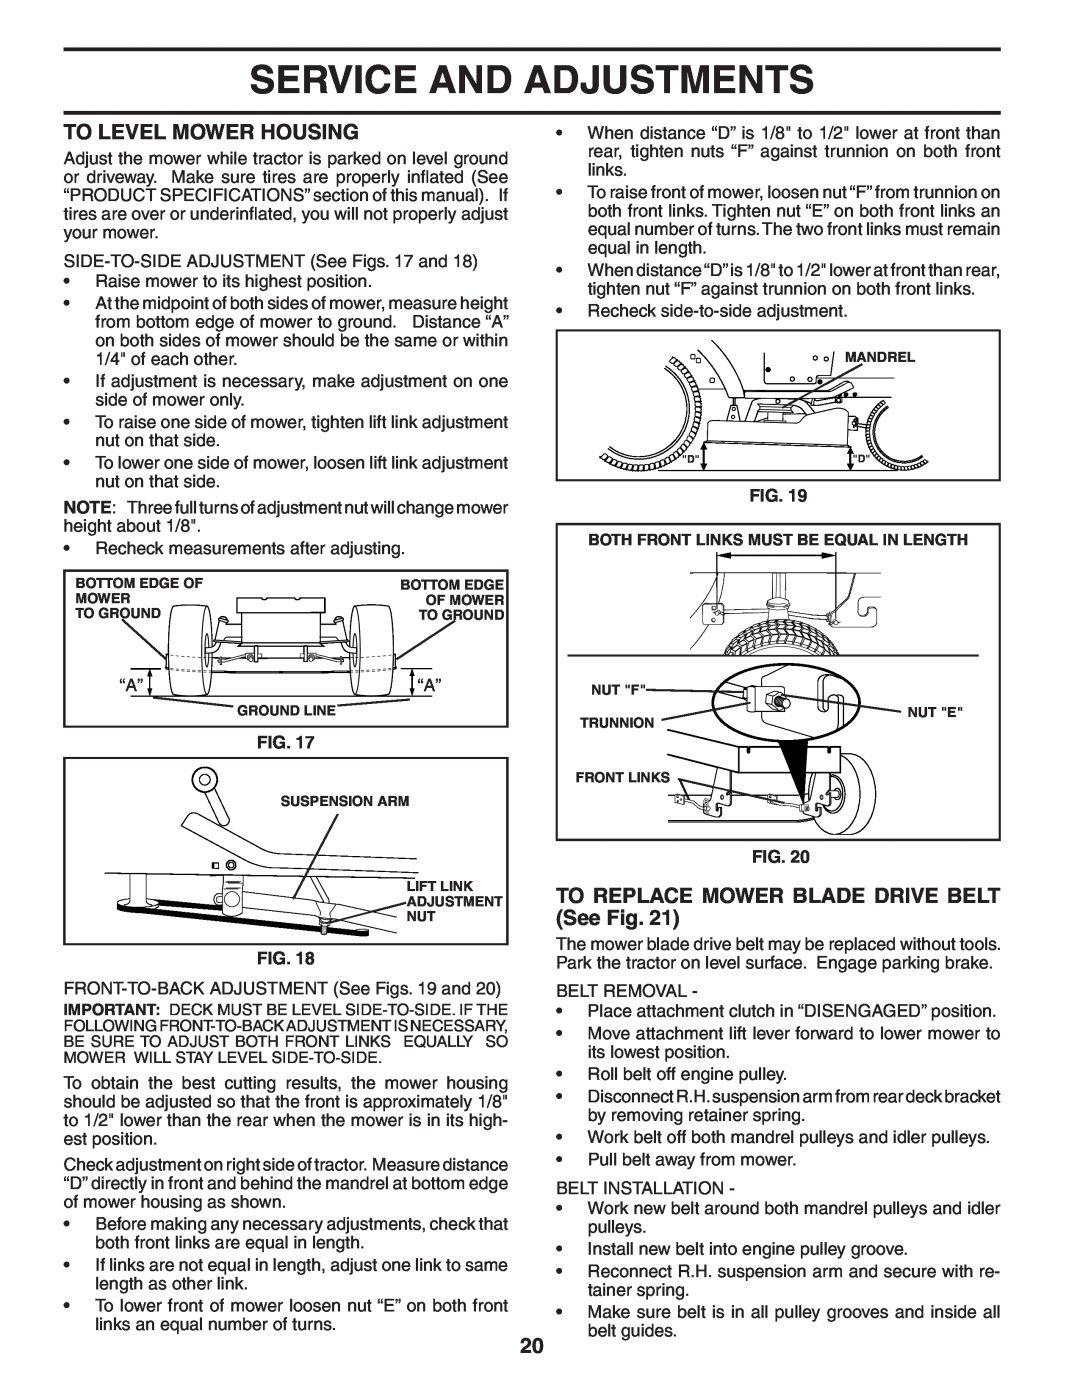 Husqvarna LT1538 owner manual To Level Mower Housing, TO REPLACE MOWER BLADE DRIVE BELT See Fig, Service And Adjustments 